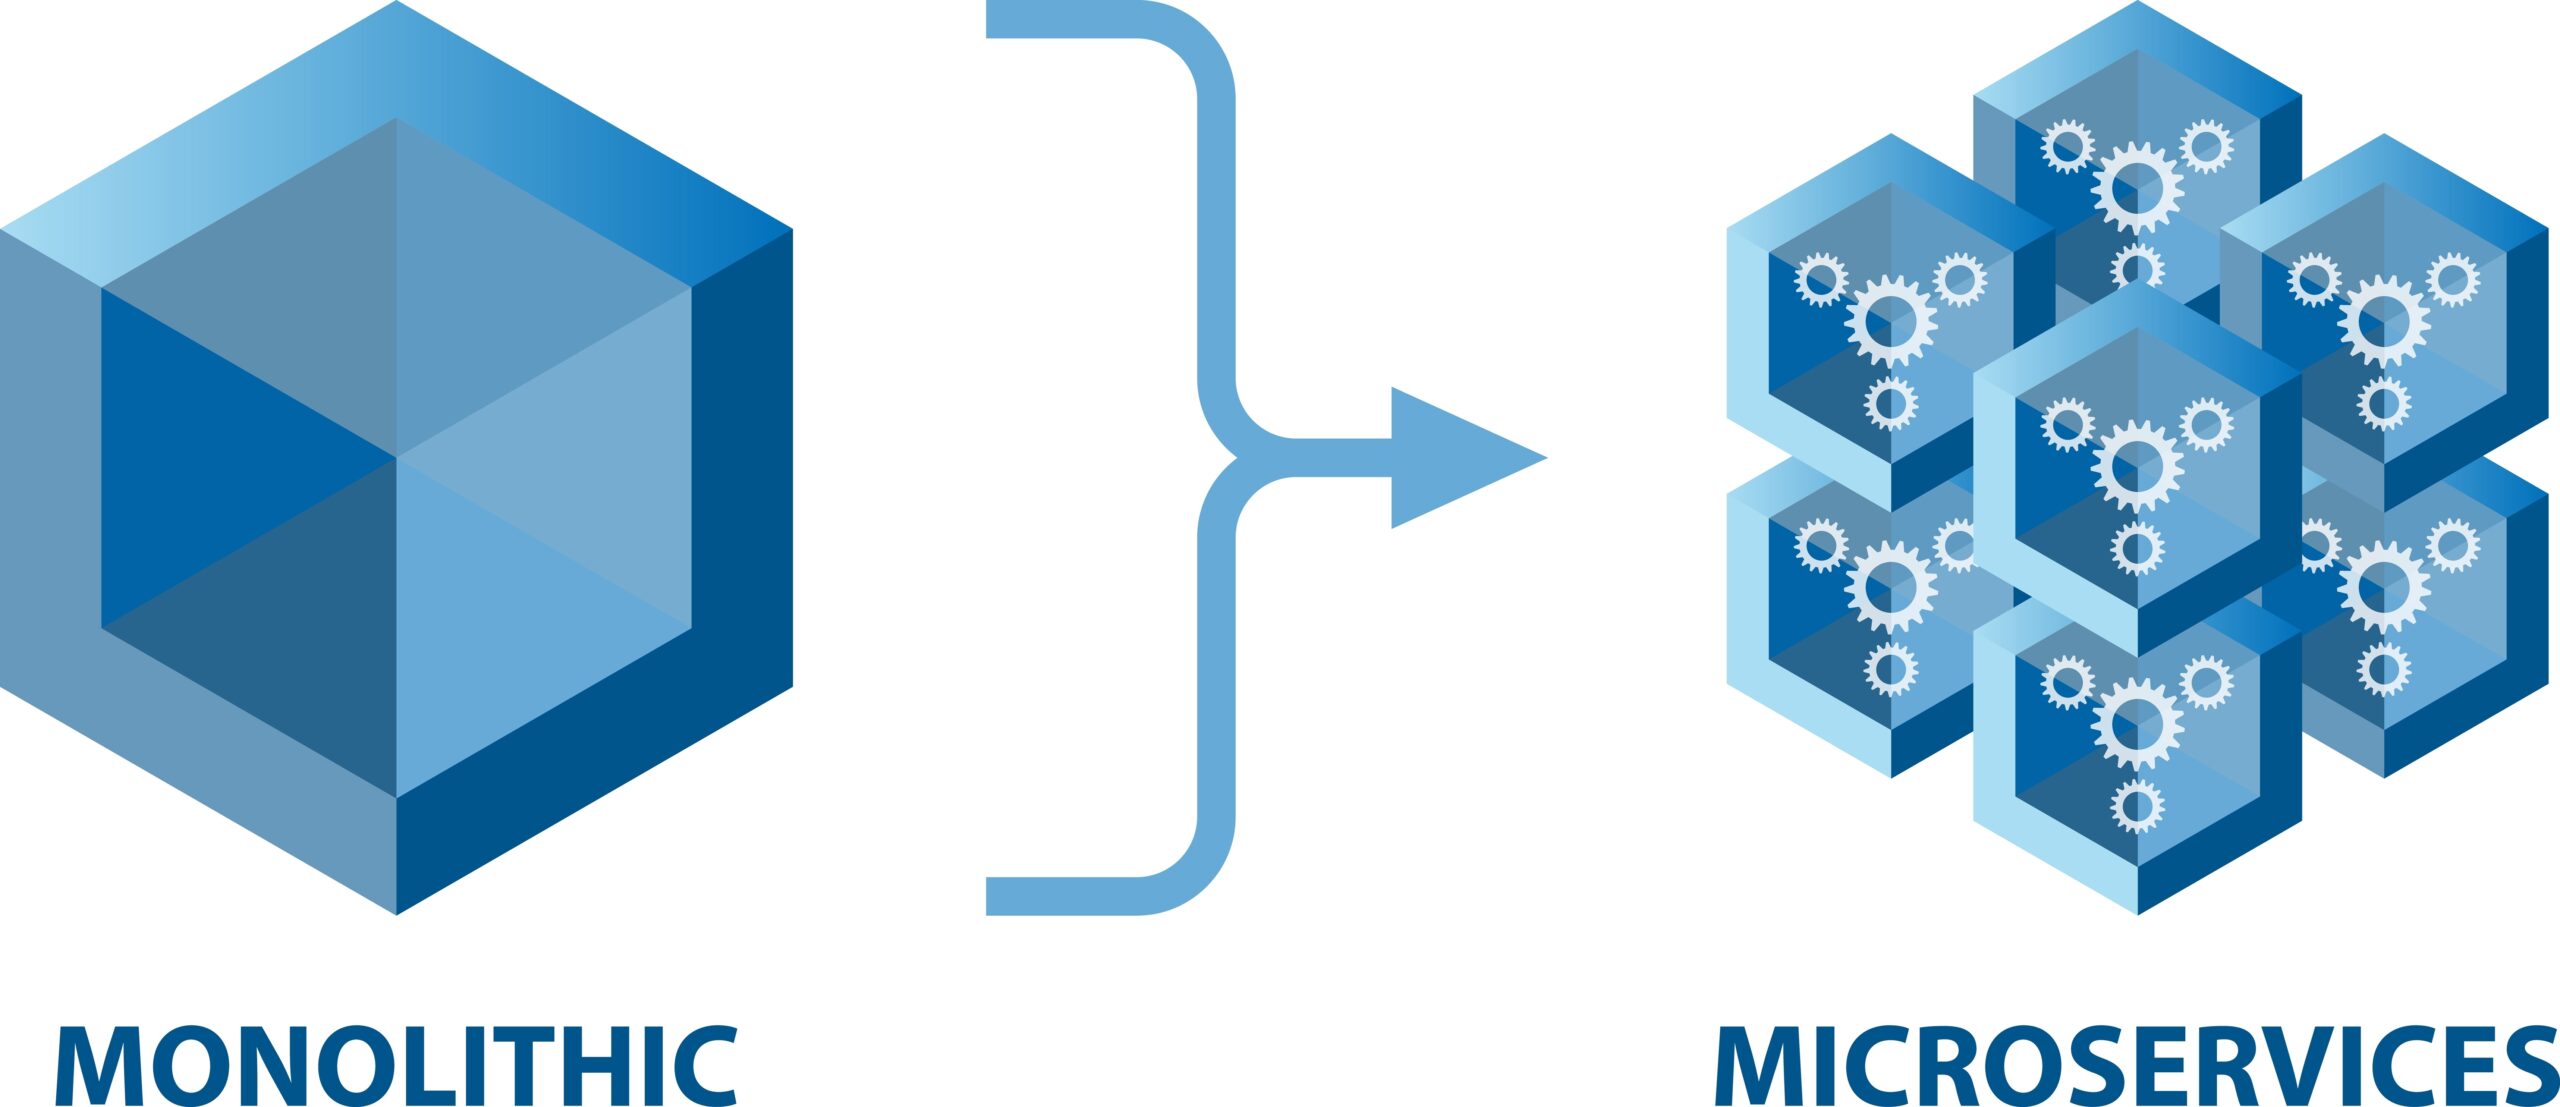 from monolithic to microservices - bluebird